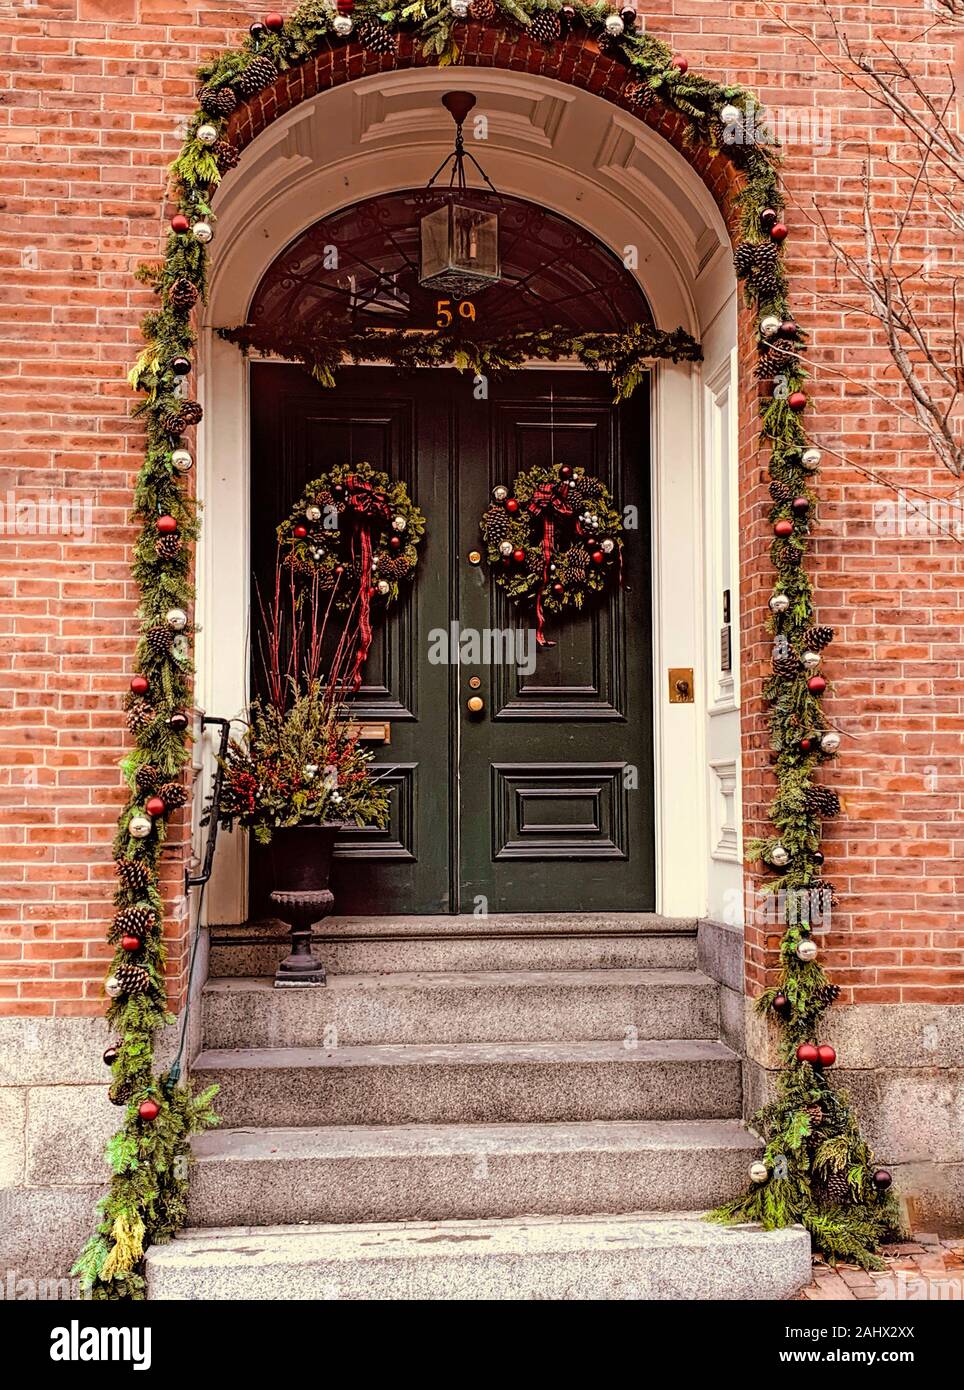 Christmas holiday wreaths hanging on doors and windows in a historic town. Stock Photo